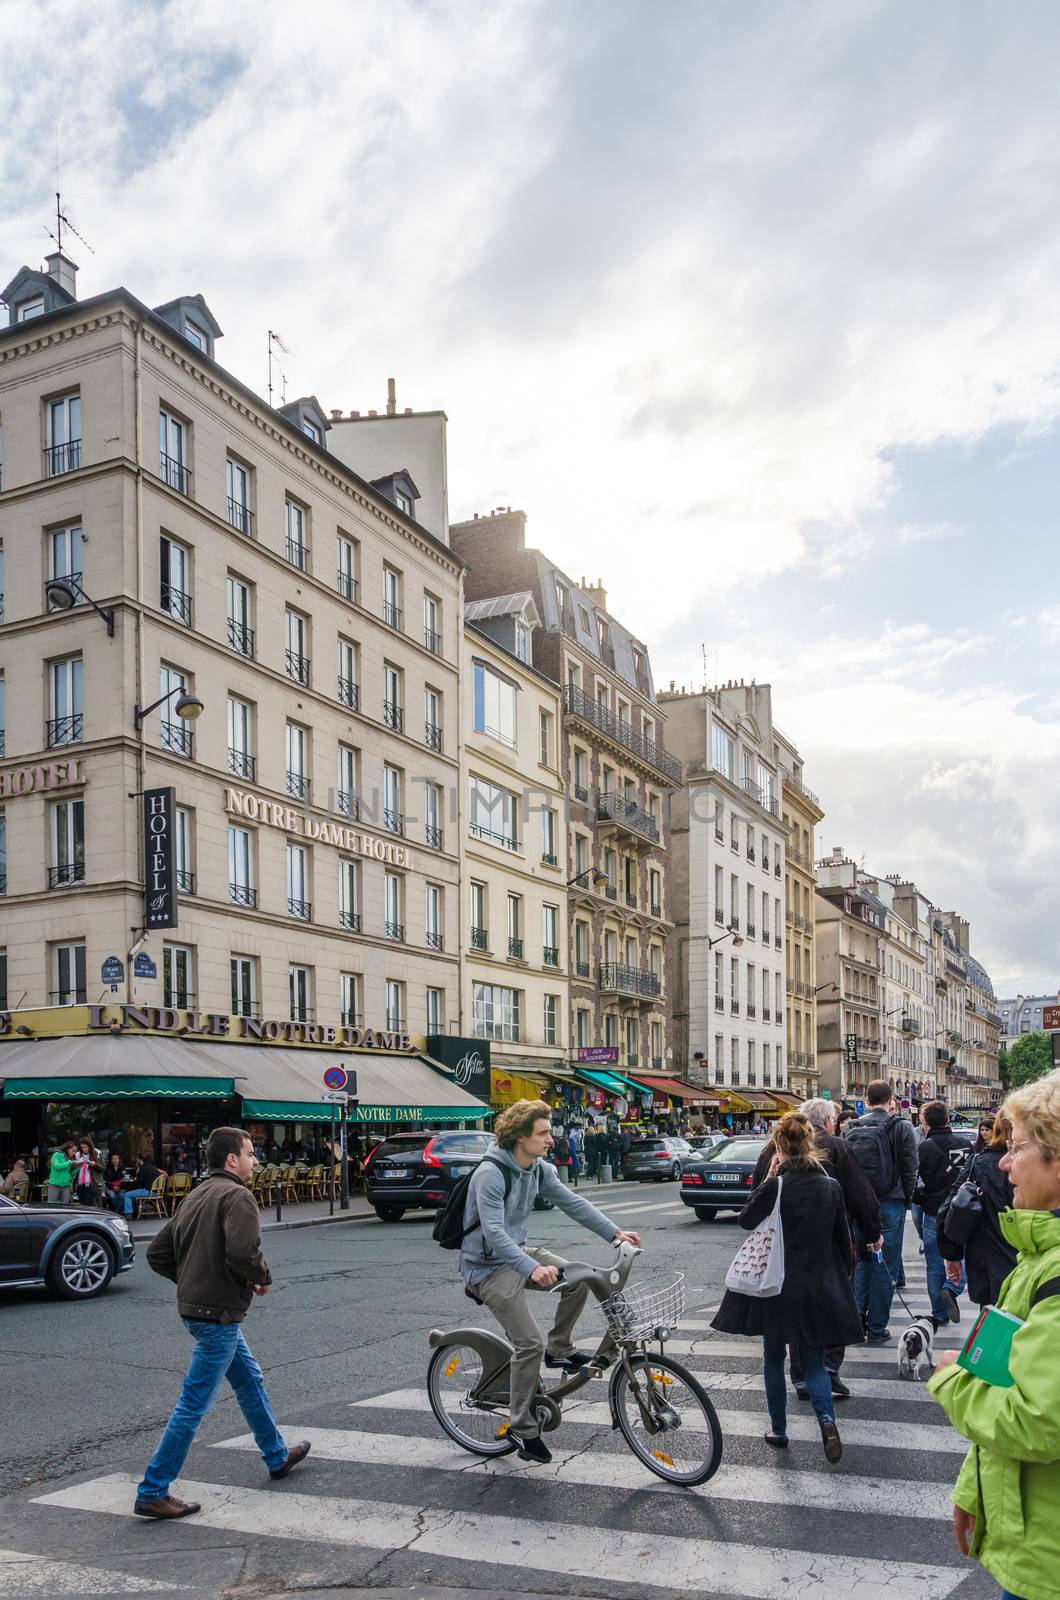 Paris, France - May 14, 2015: French People in Cite Island, Paris, France. on May 14, 2015. It is the centre of Paris and the location where the medieval city was refounded.